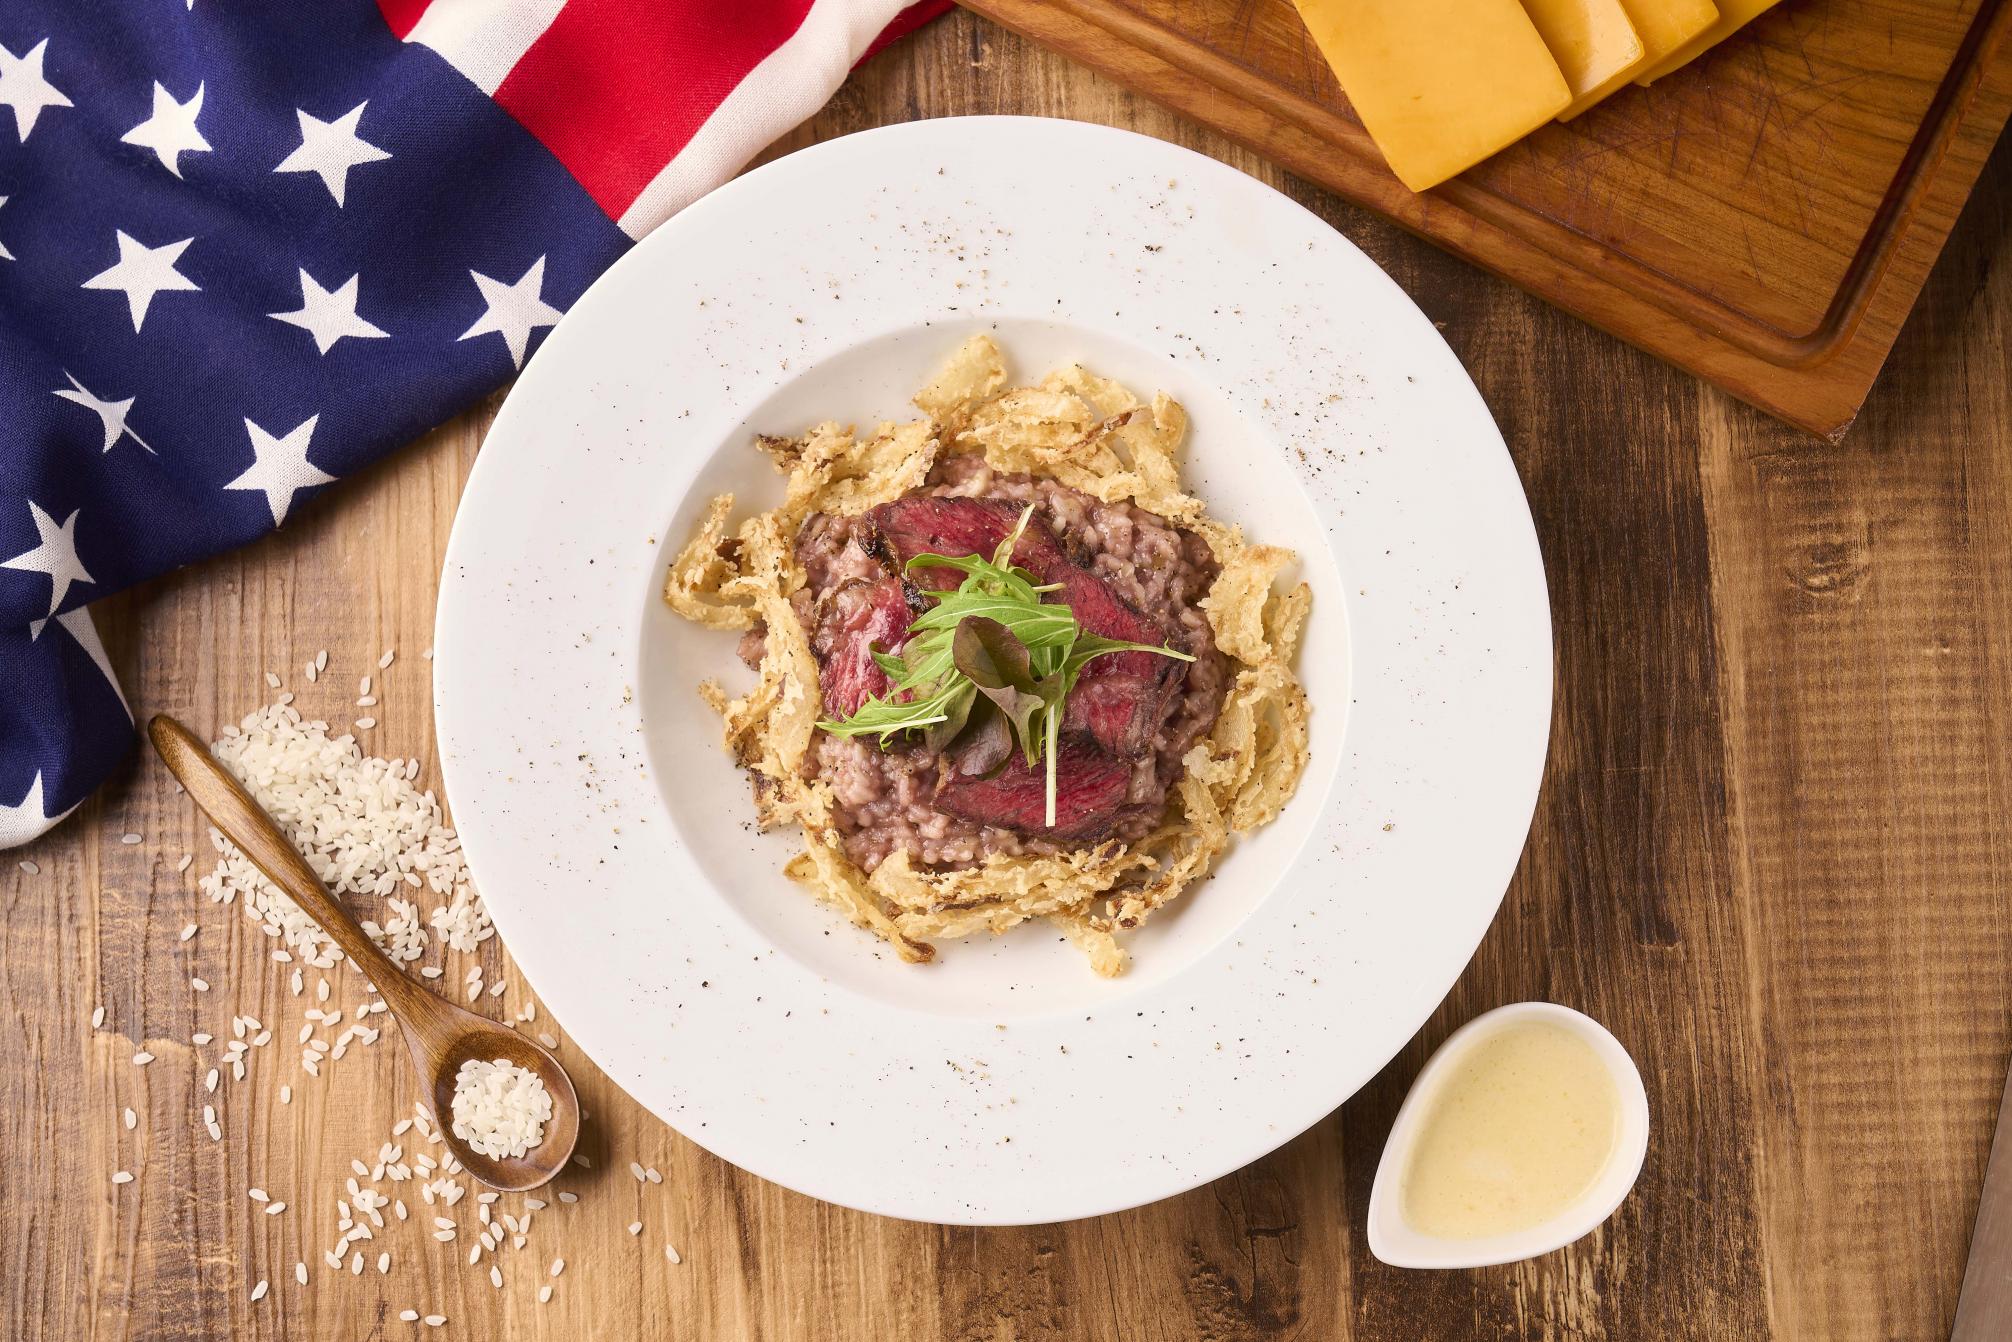 uJtHjAEsUELb`vgTASTE OF AMERICAhQj[uGrilled Beef & Red Wine Risotto with Cheese Saucev